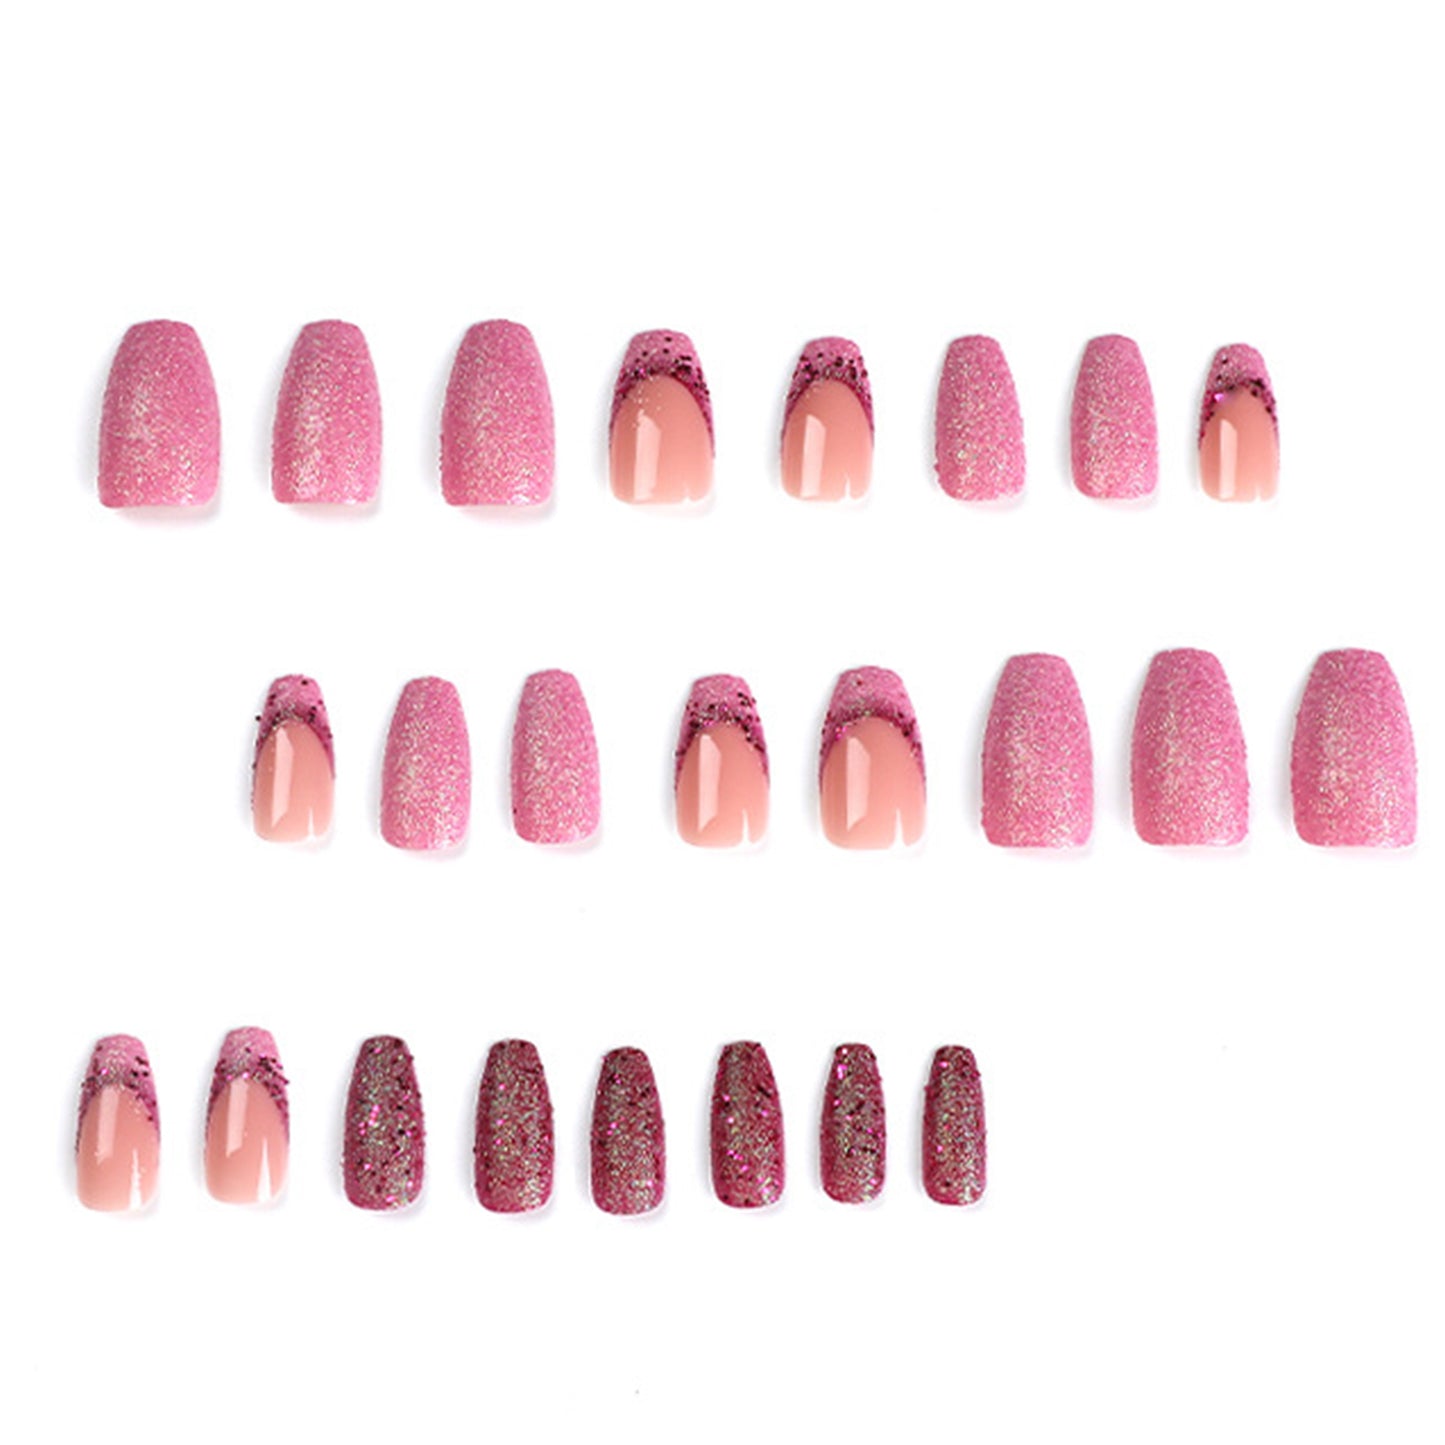 Glam Pink Short Coffin Press-On Nails